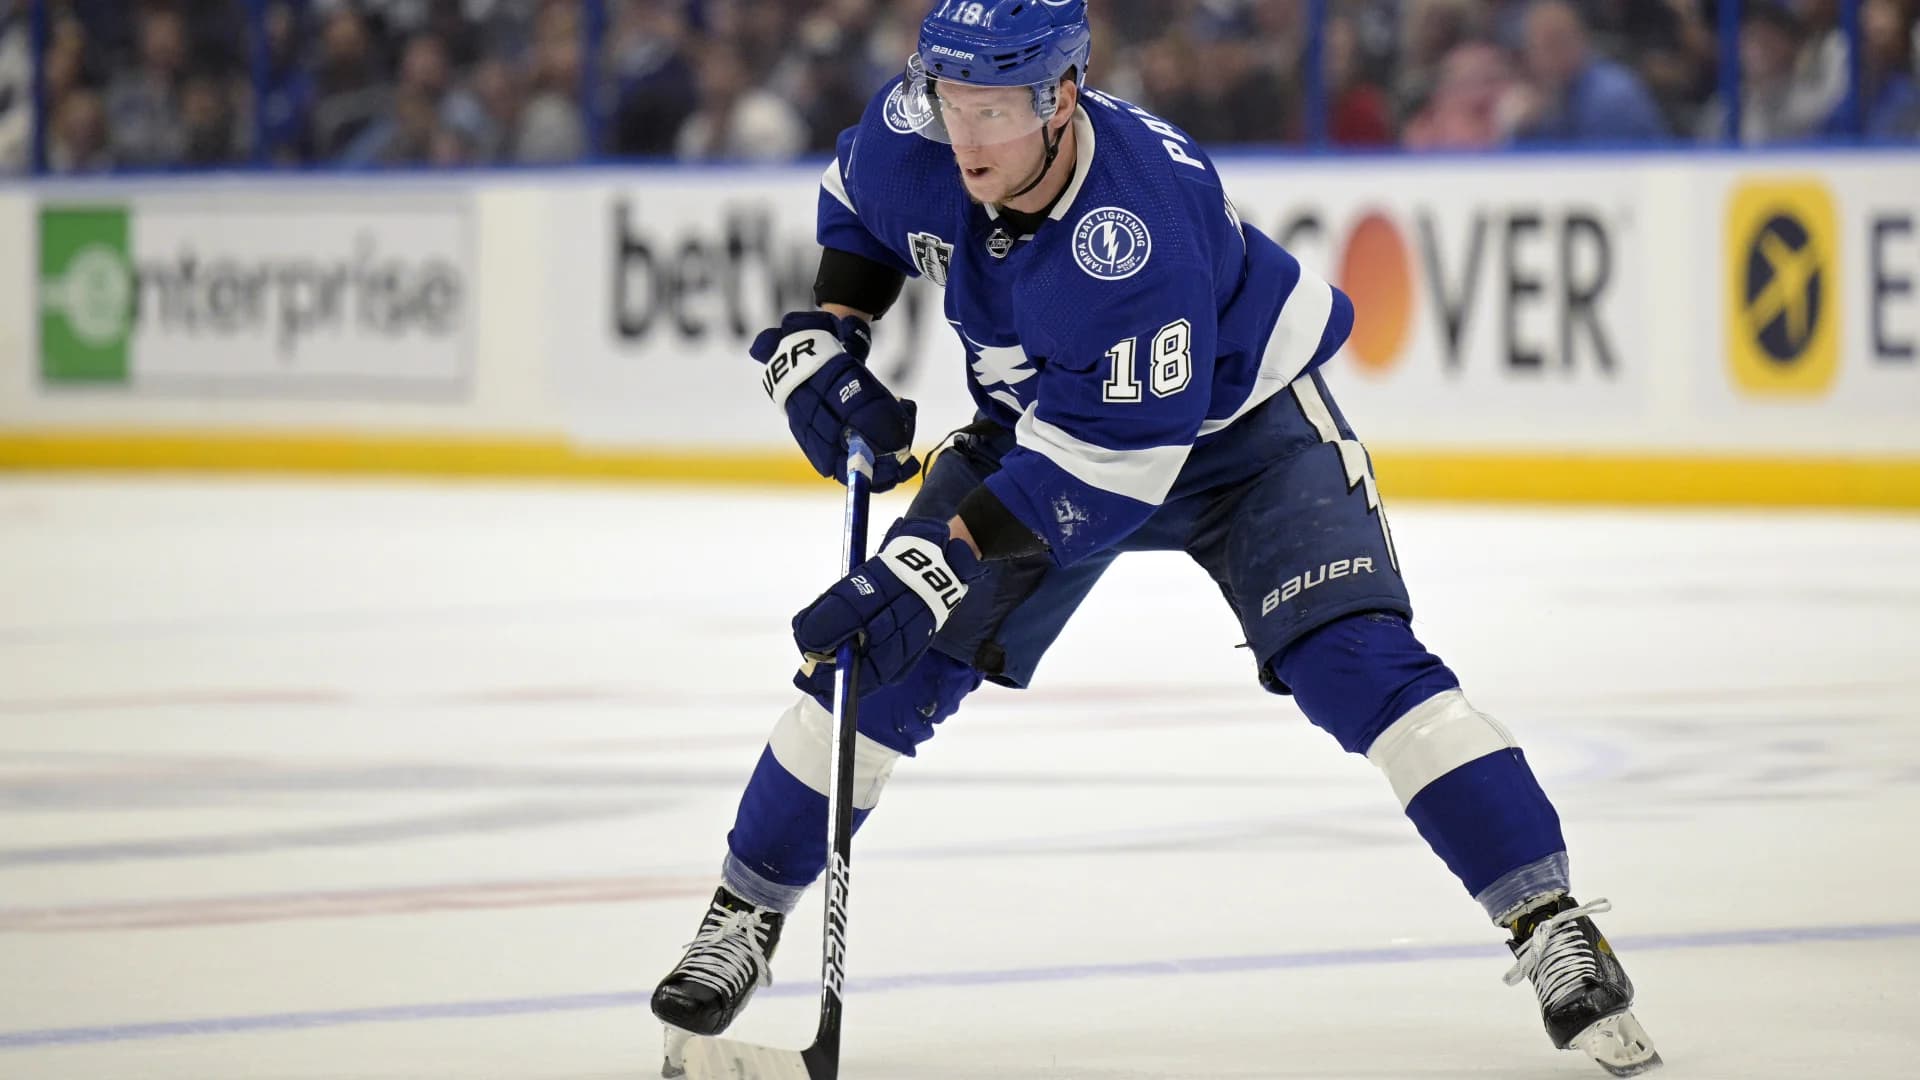 Devils thrilled to add Palat after missing out on Gaudreau